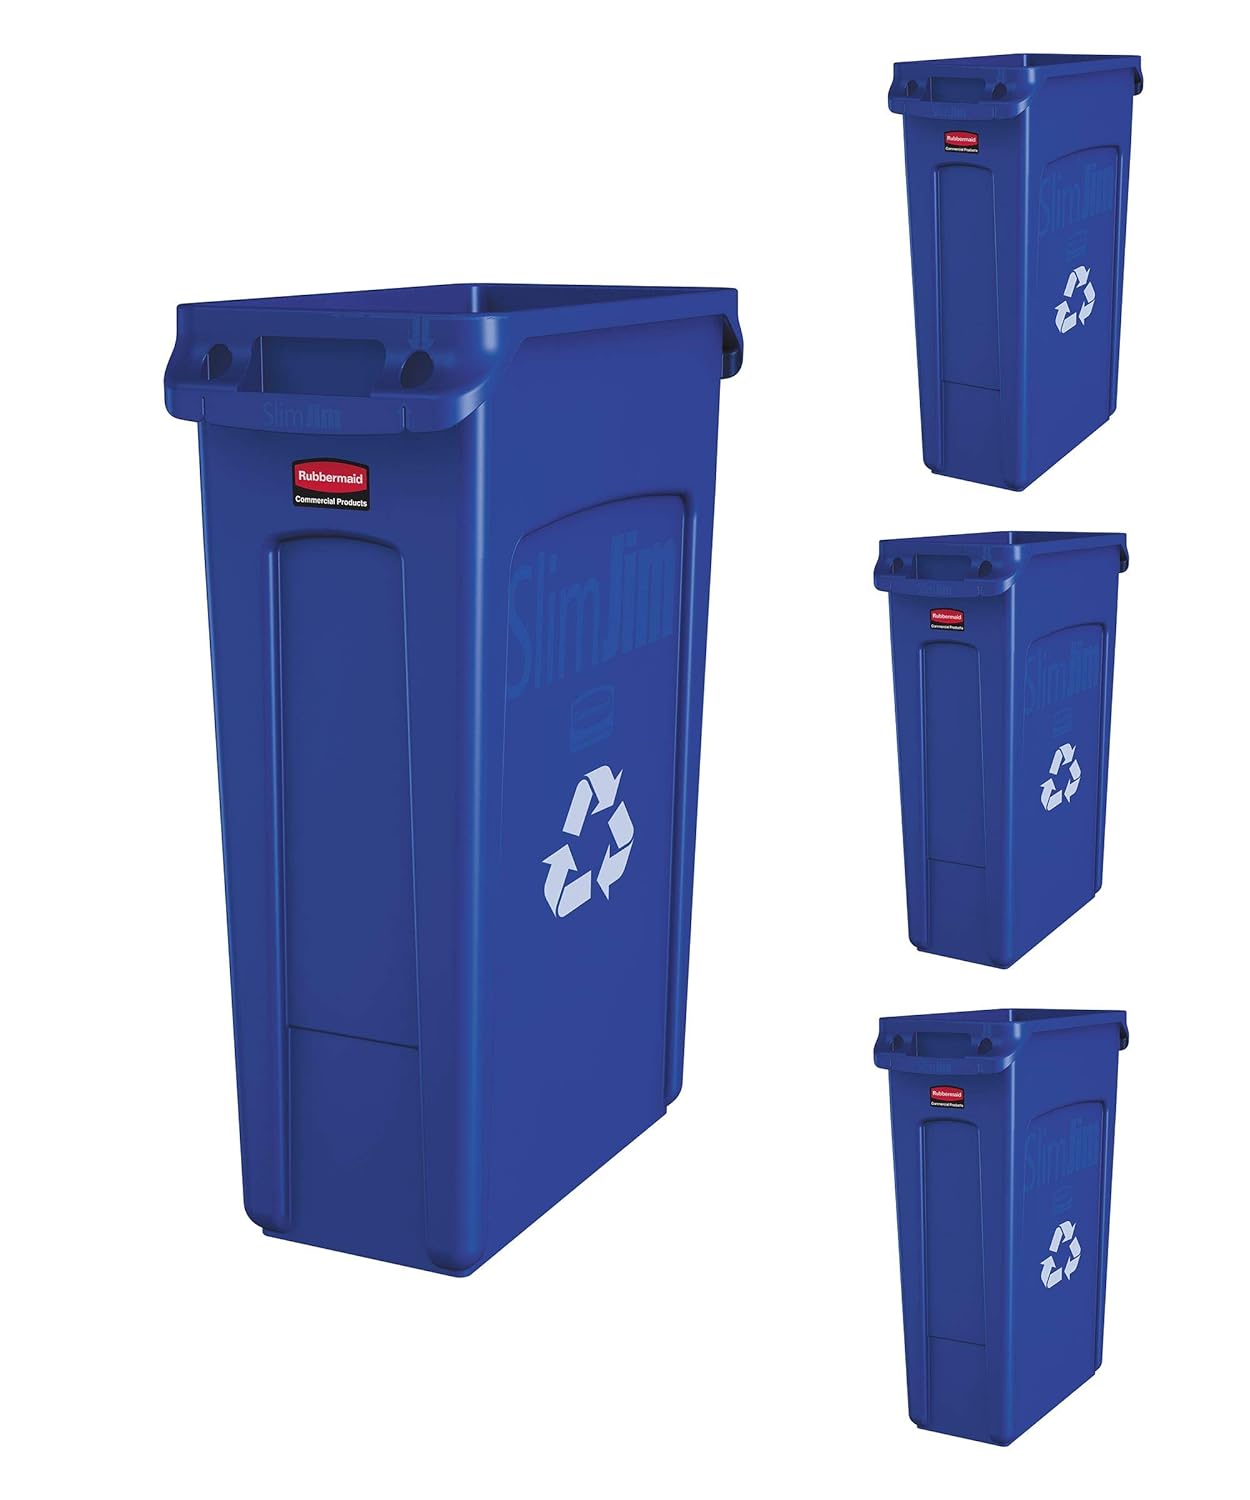 Rubbermaid Slim Jim Trash Can Waste Bin with Venting Channels, Blue Recycling for Kitchen/Office/Workspace, Pack of 4